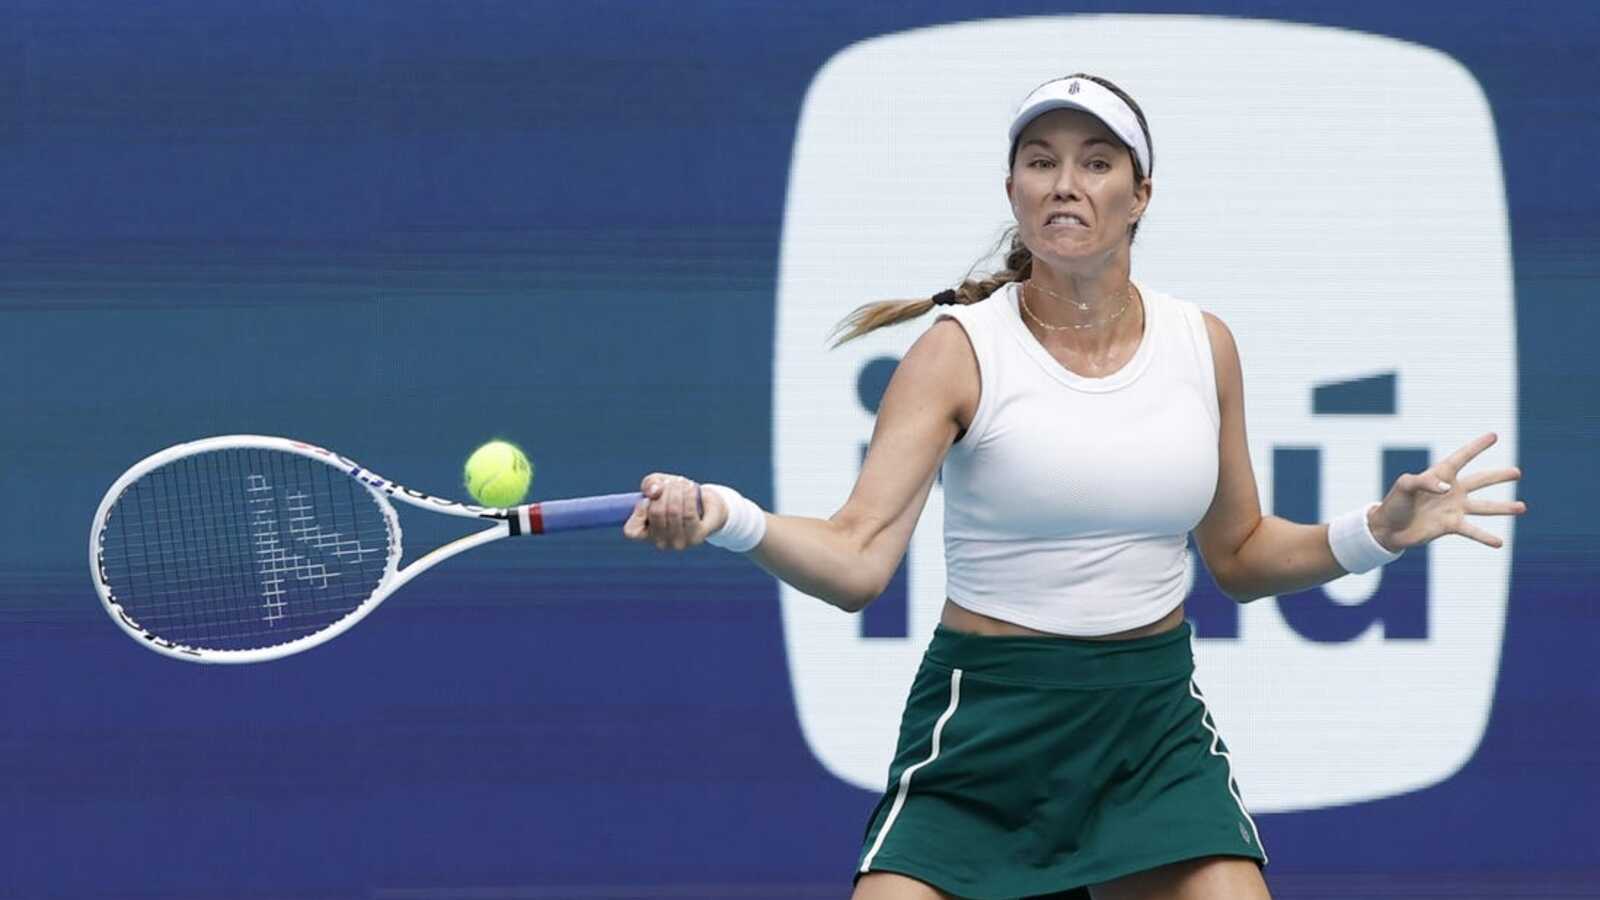 Danielle Collins stretches winning streak to 15 with three-set victory in Madrid